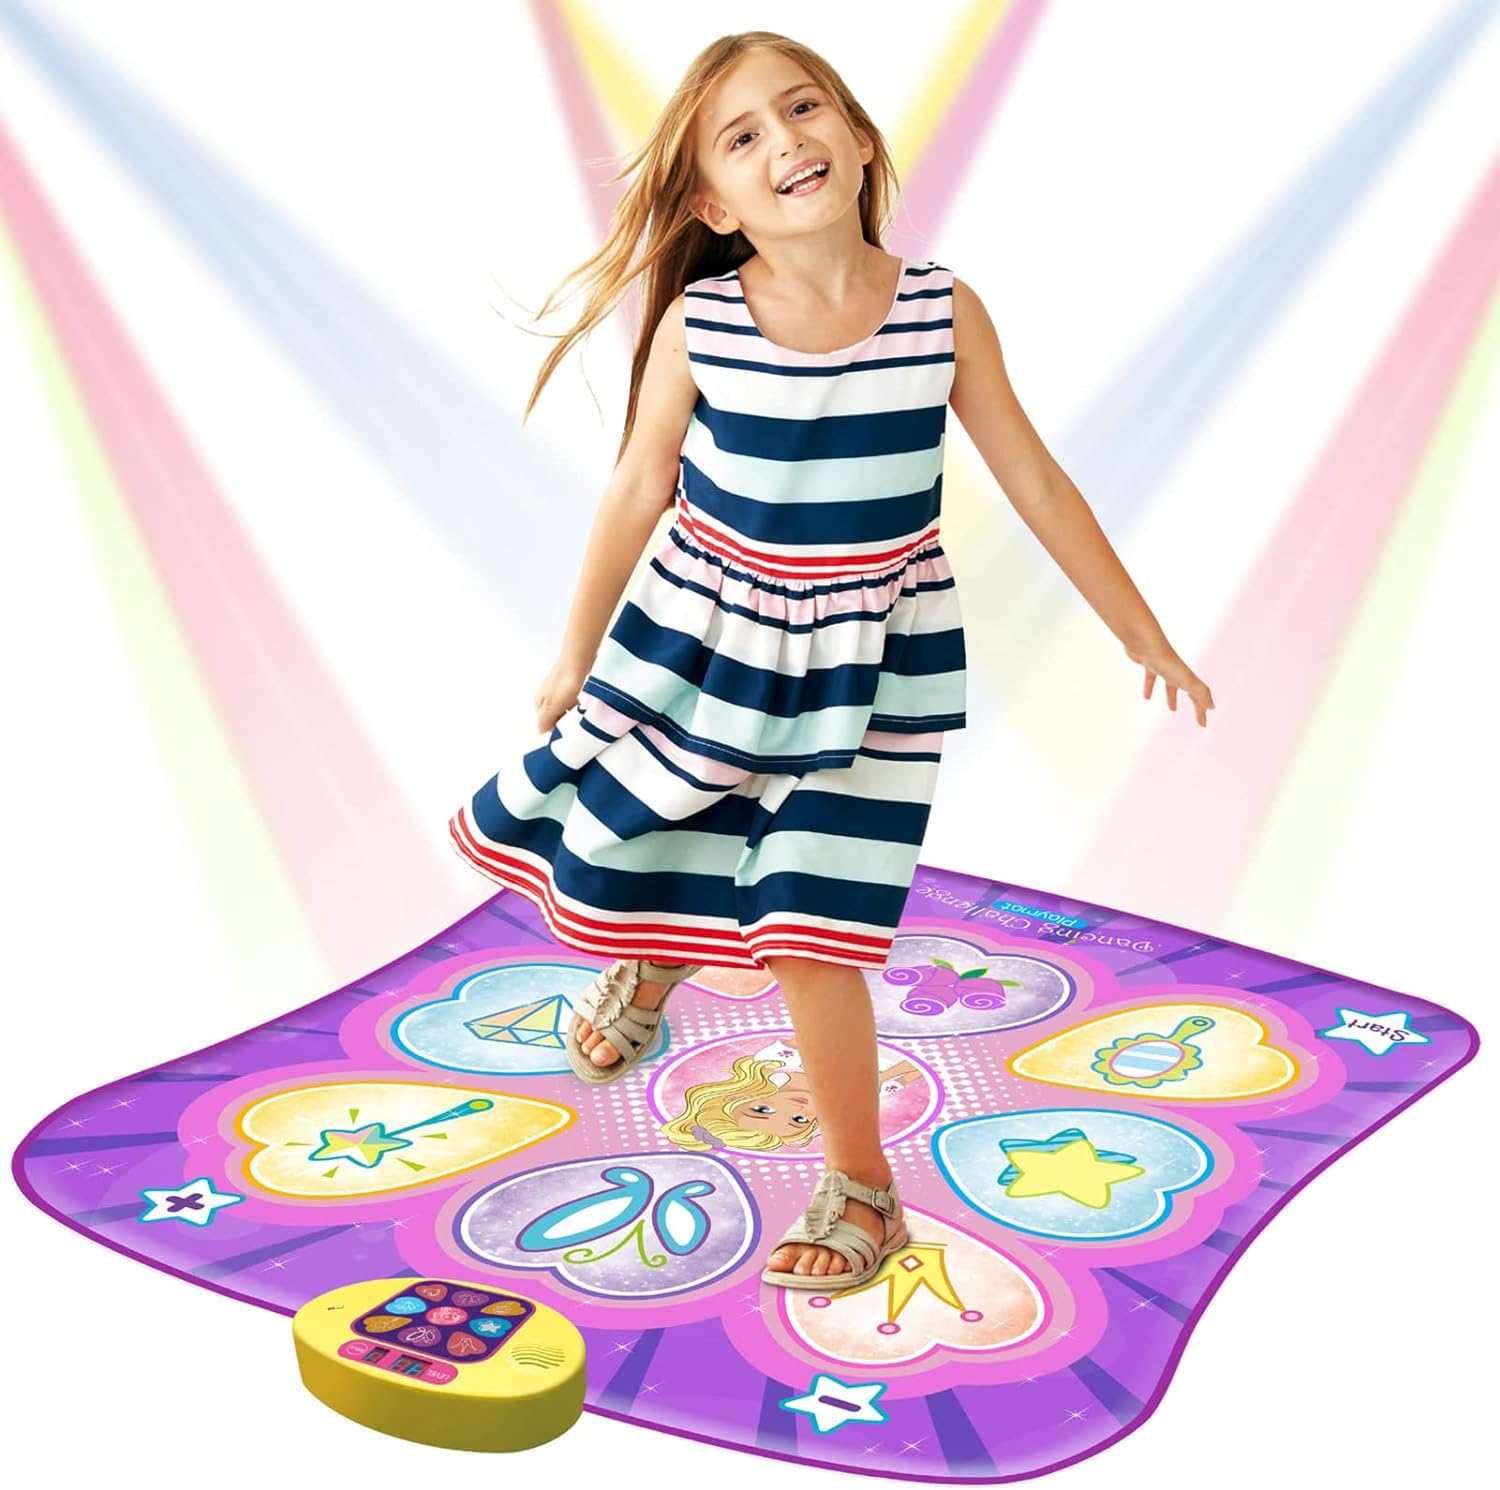 You are currently viewing SUNLIN Dance Mat Toys for Girls Ages 3-10 Review